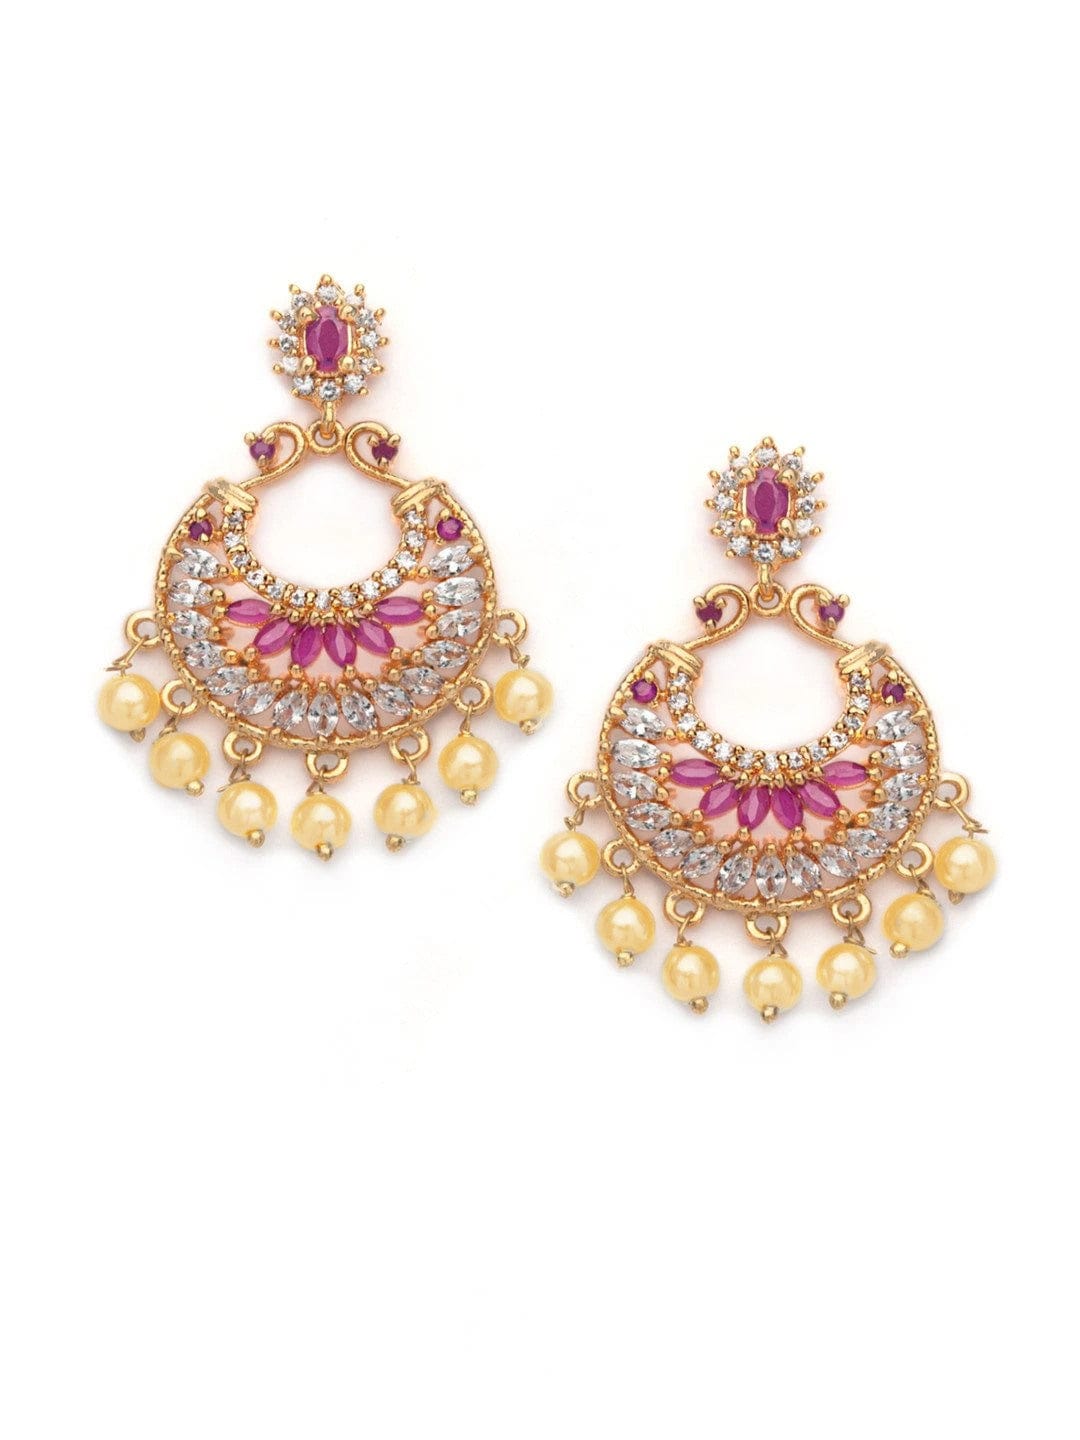 Rubans Gold Toned CZ And Ruby Studded Embellished With Pearls Chandbali Earrings Earrings